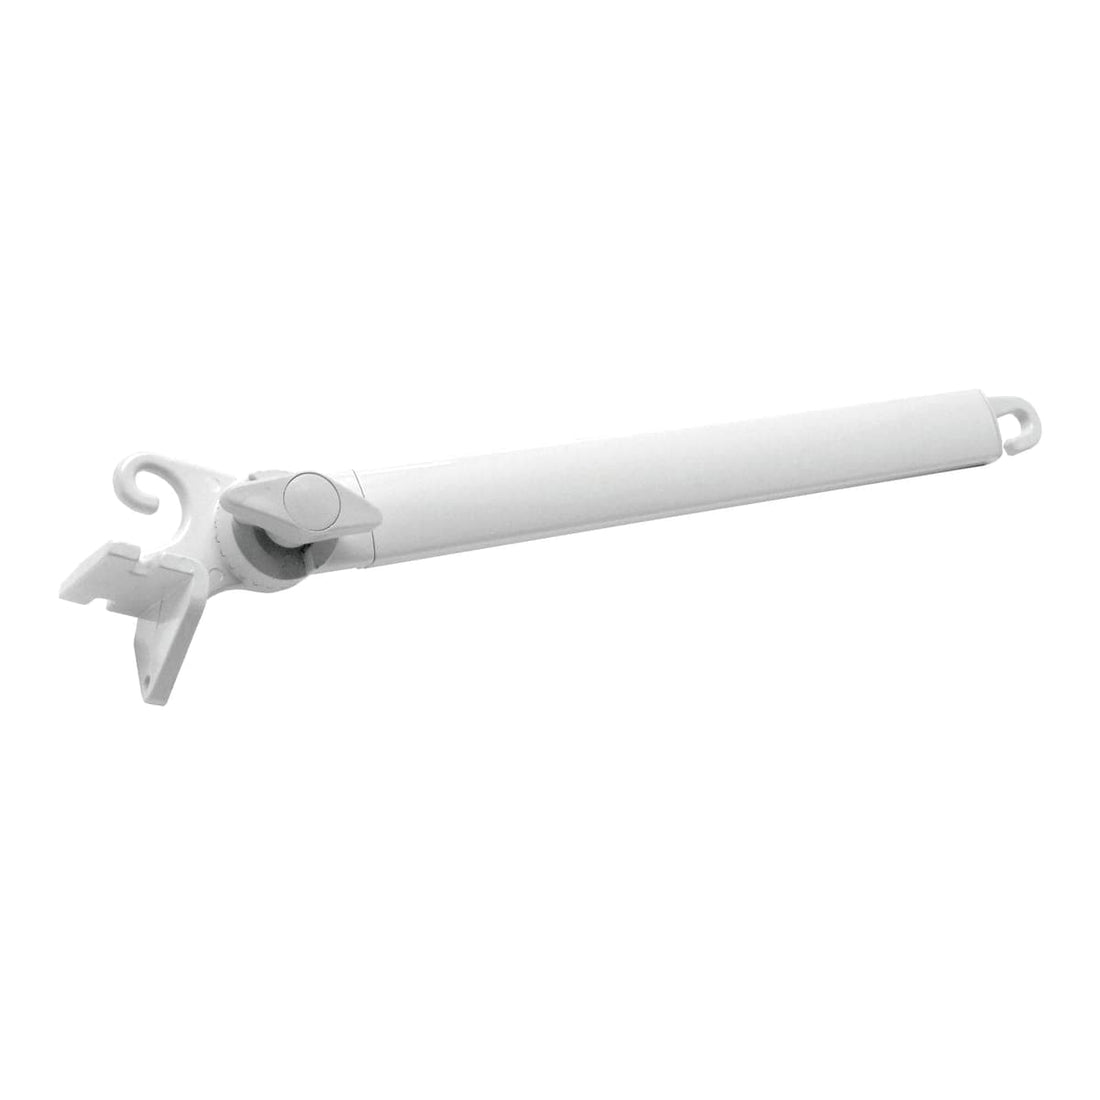 PAIR OF RIGHT/LEFT ARMS FOR CAD AWNING - best price from Maltashopper.com BR440001809